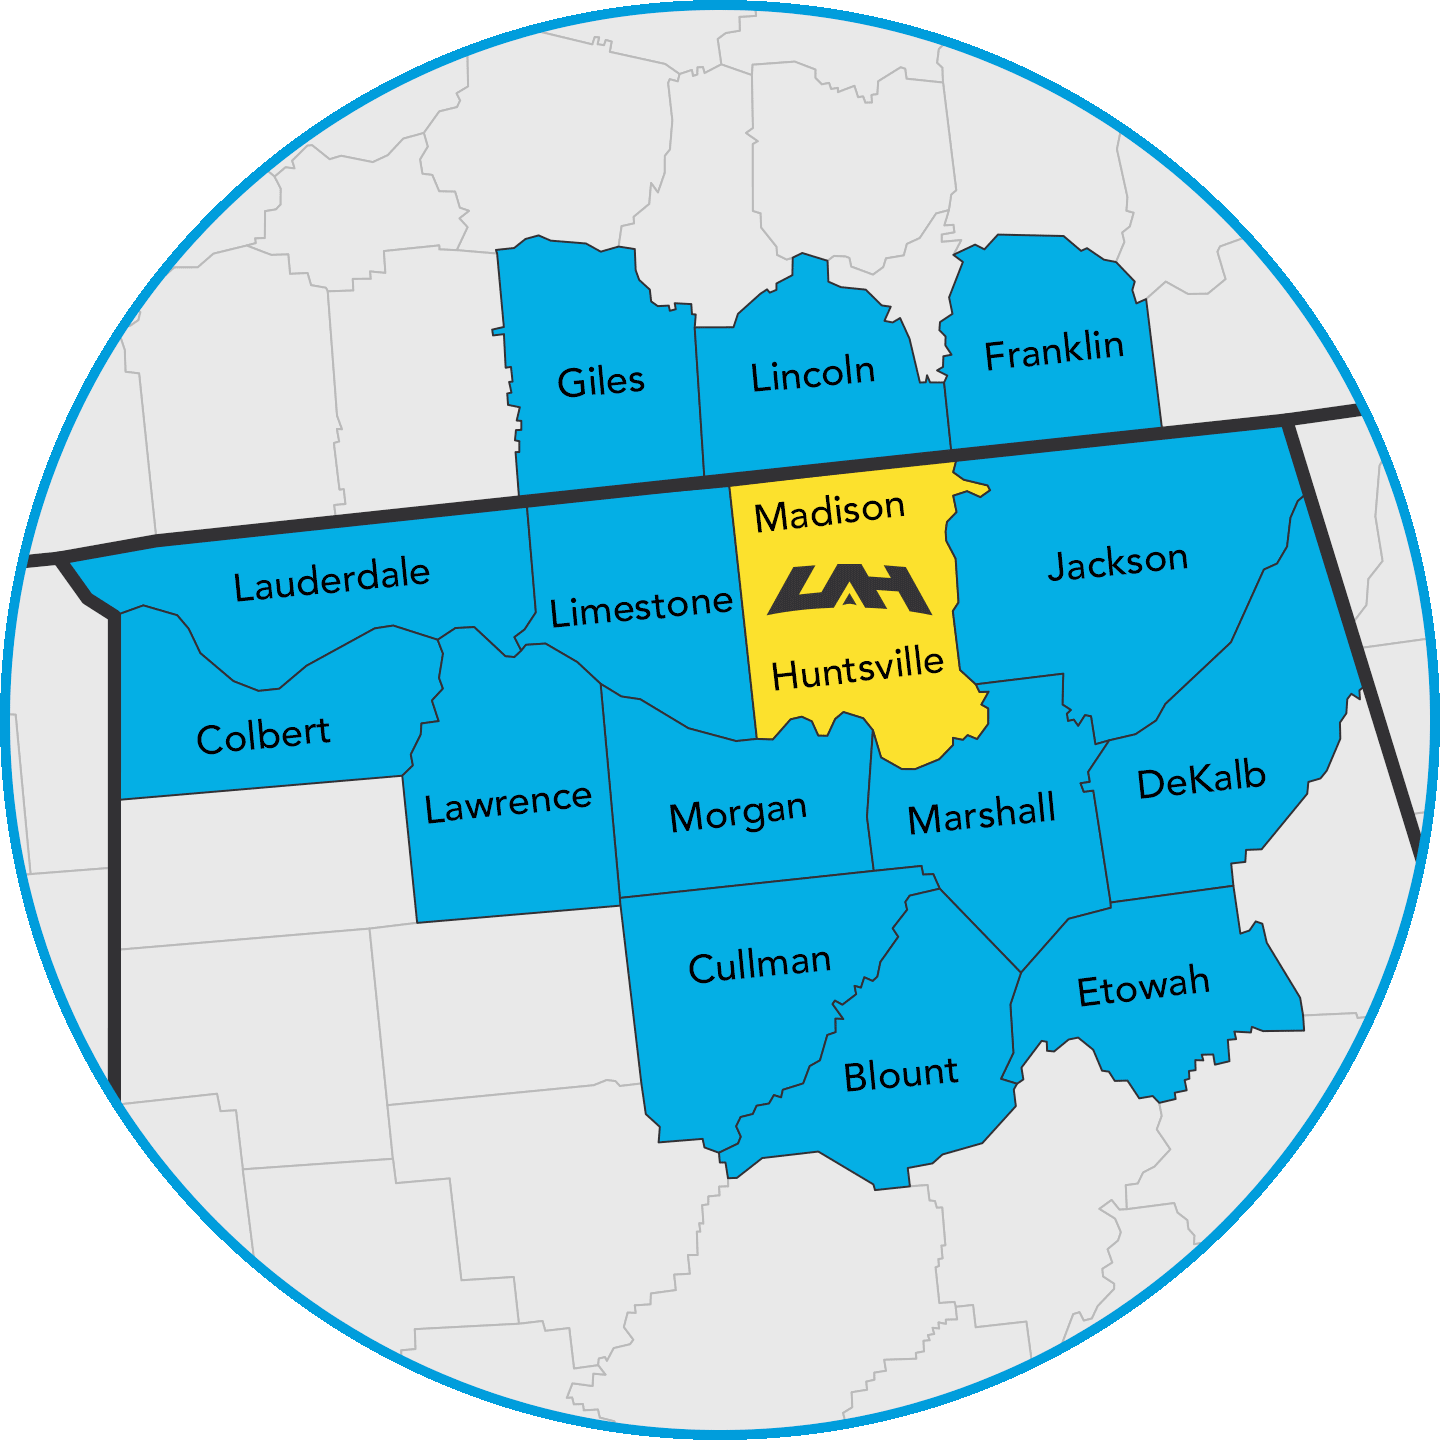 Map showing the innovation region of North Alabama and South-Central Tennessee